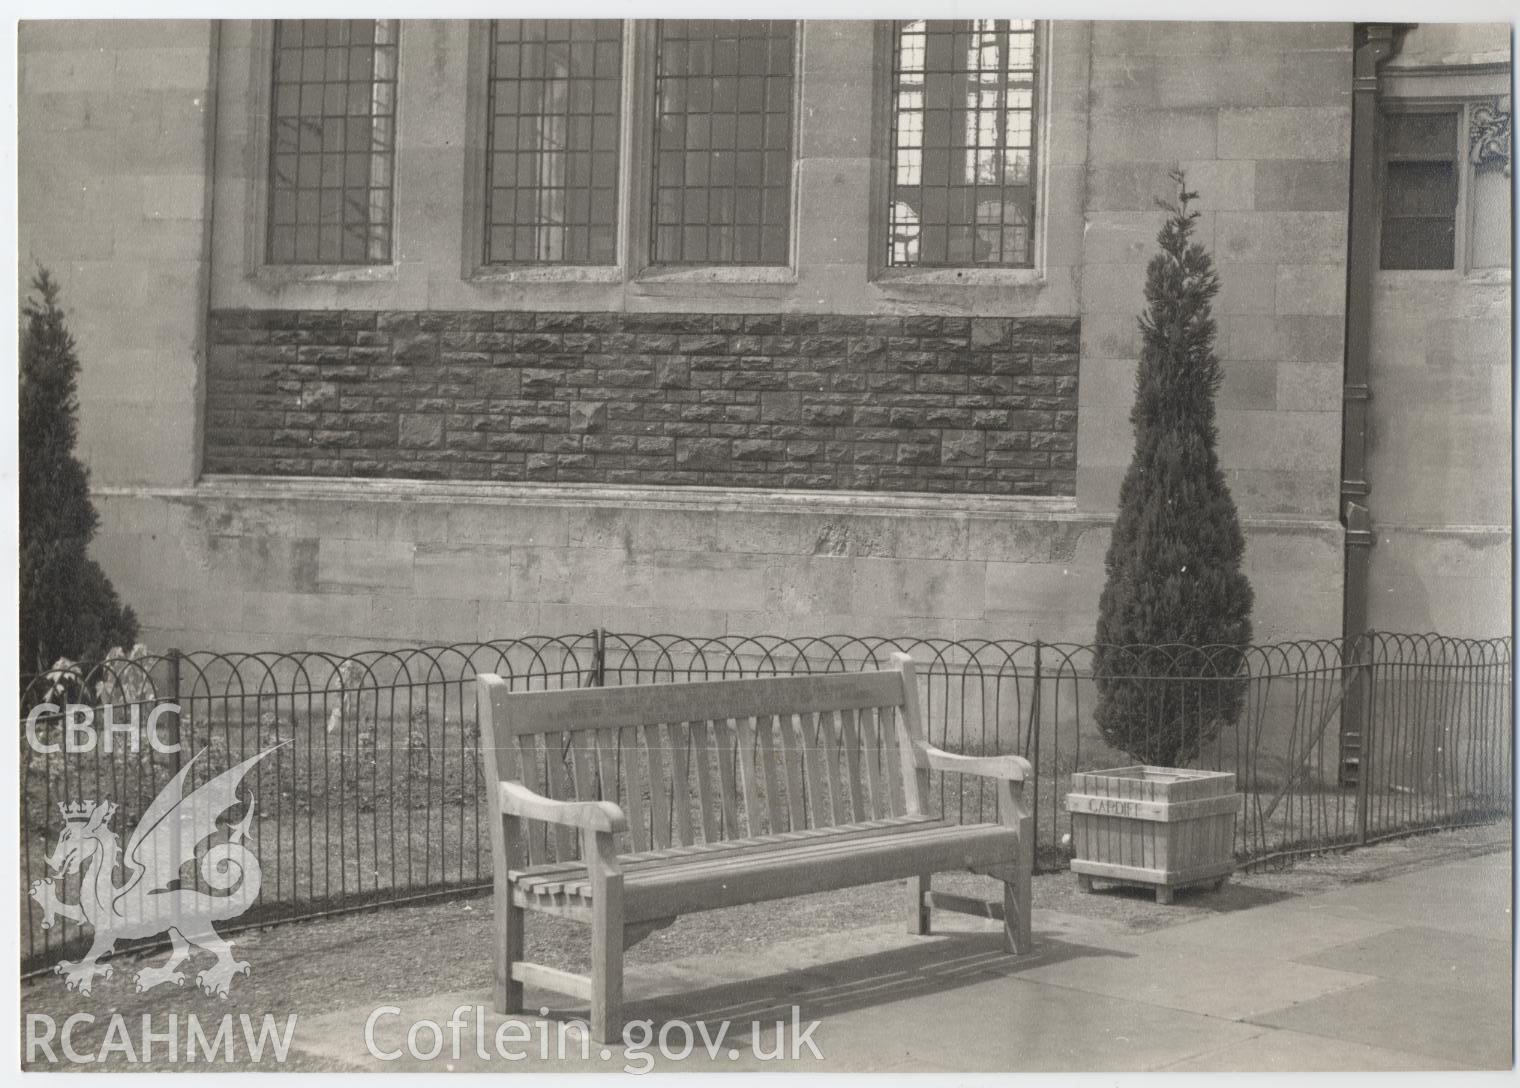 Black and white photograph showing a bench outside Cathays Public Library, Cardiff.